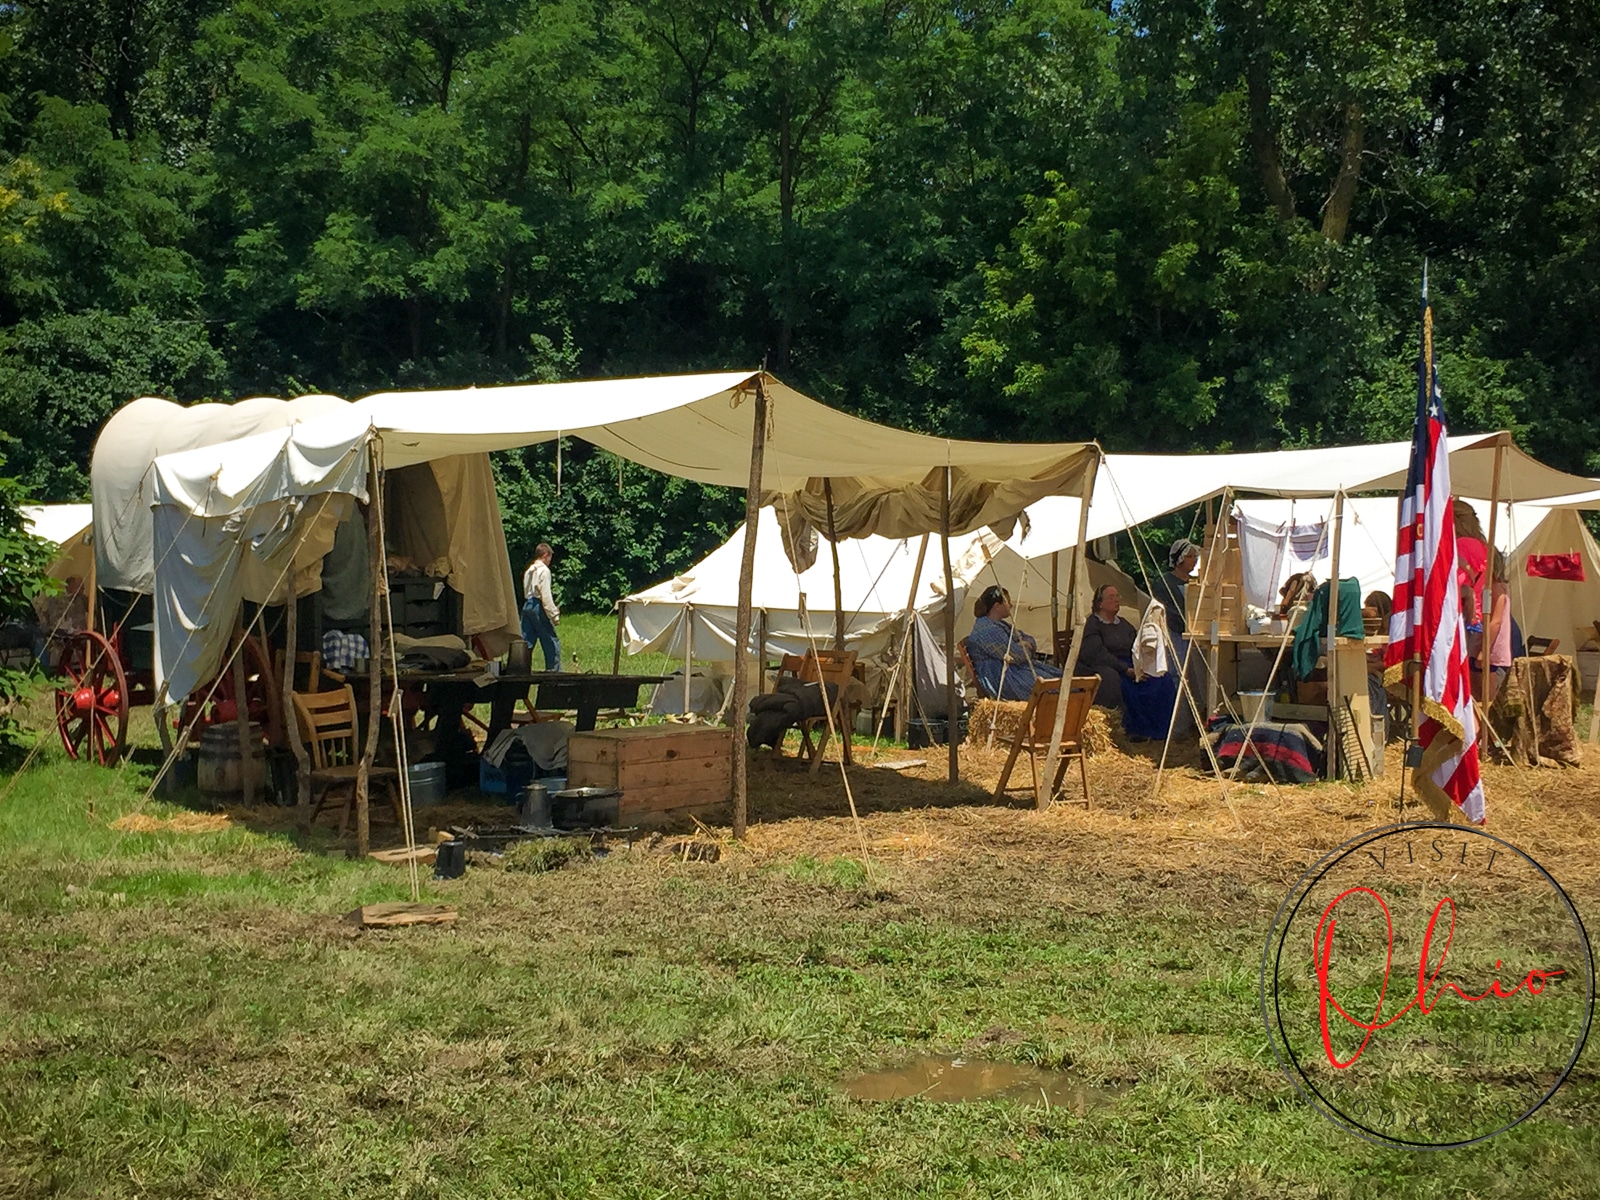 civil war era tents with wooden poles on muddy grass Photo credit: Cindy Gordon of VisitOhioToday.com